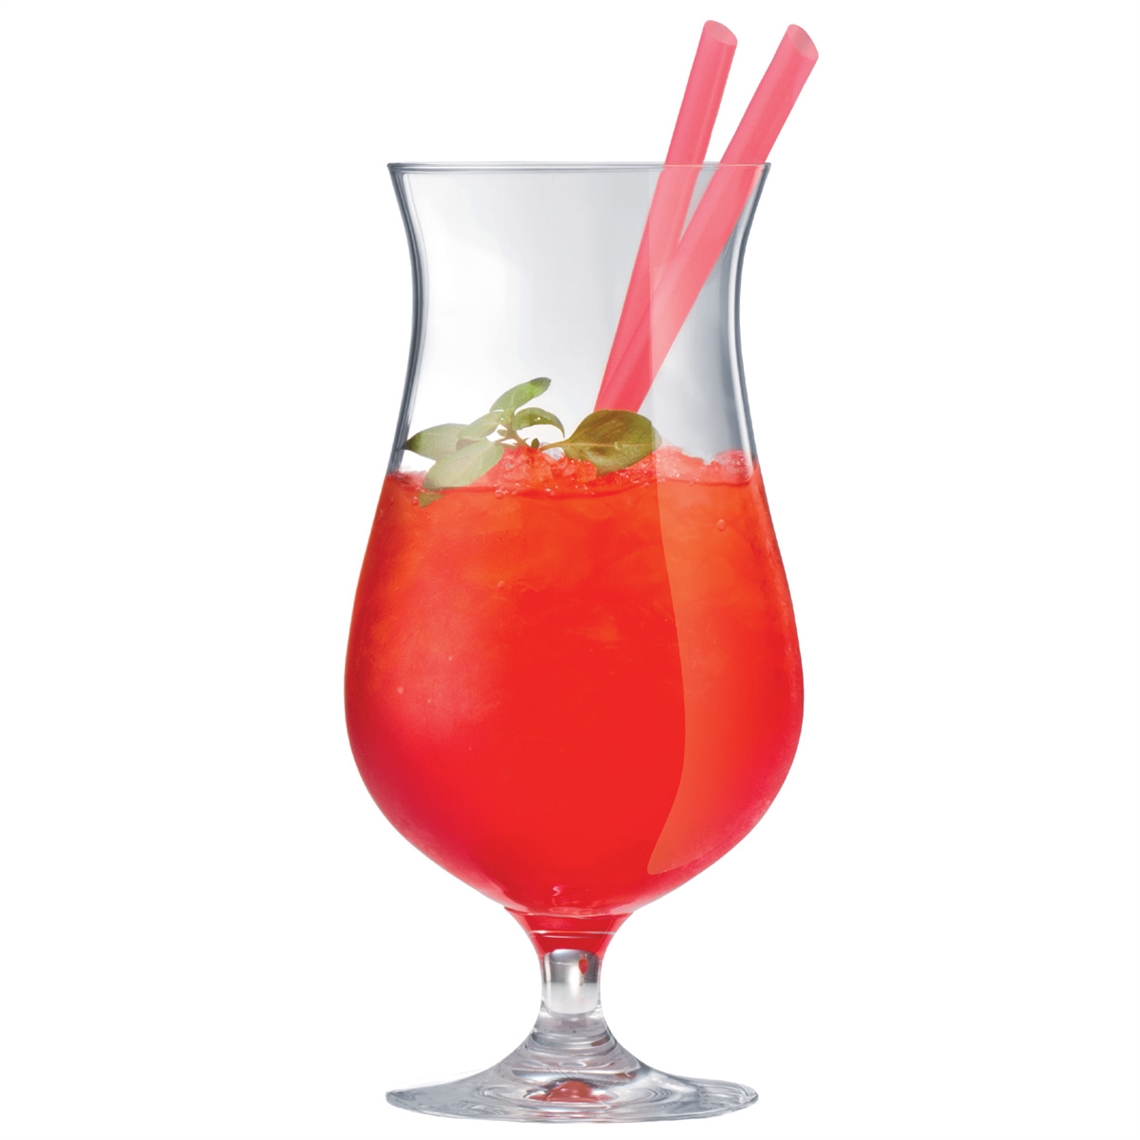 View more riedel extreme from our Cocktail Glasses range